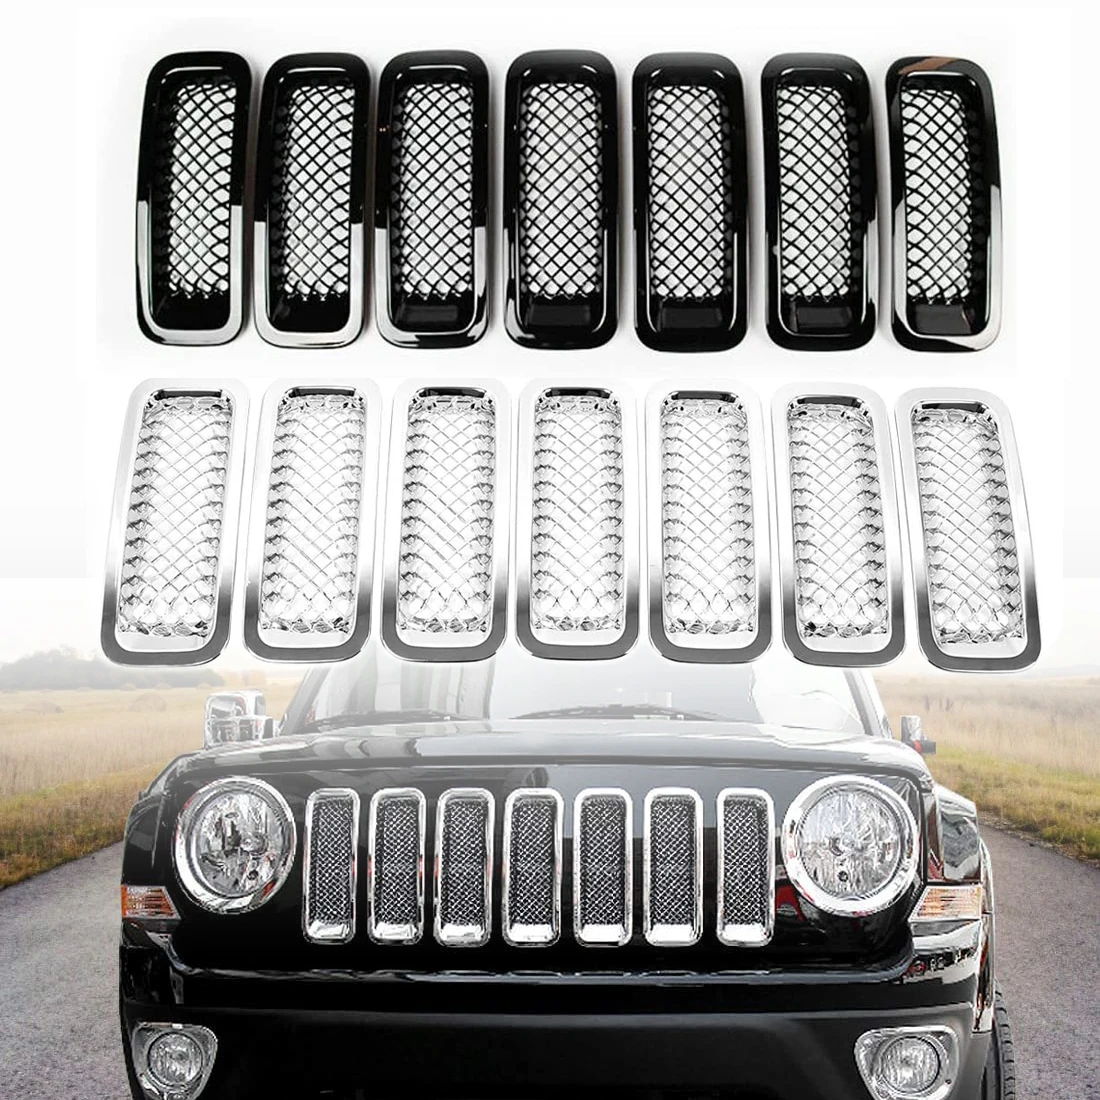 

7pcs/set Front Mesh Grille Cover Car Chrome Styling Decoration Adhesive For Jeep Patriot 2011-2016 Honeycomb Grill Insert Trim